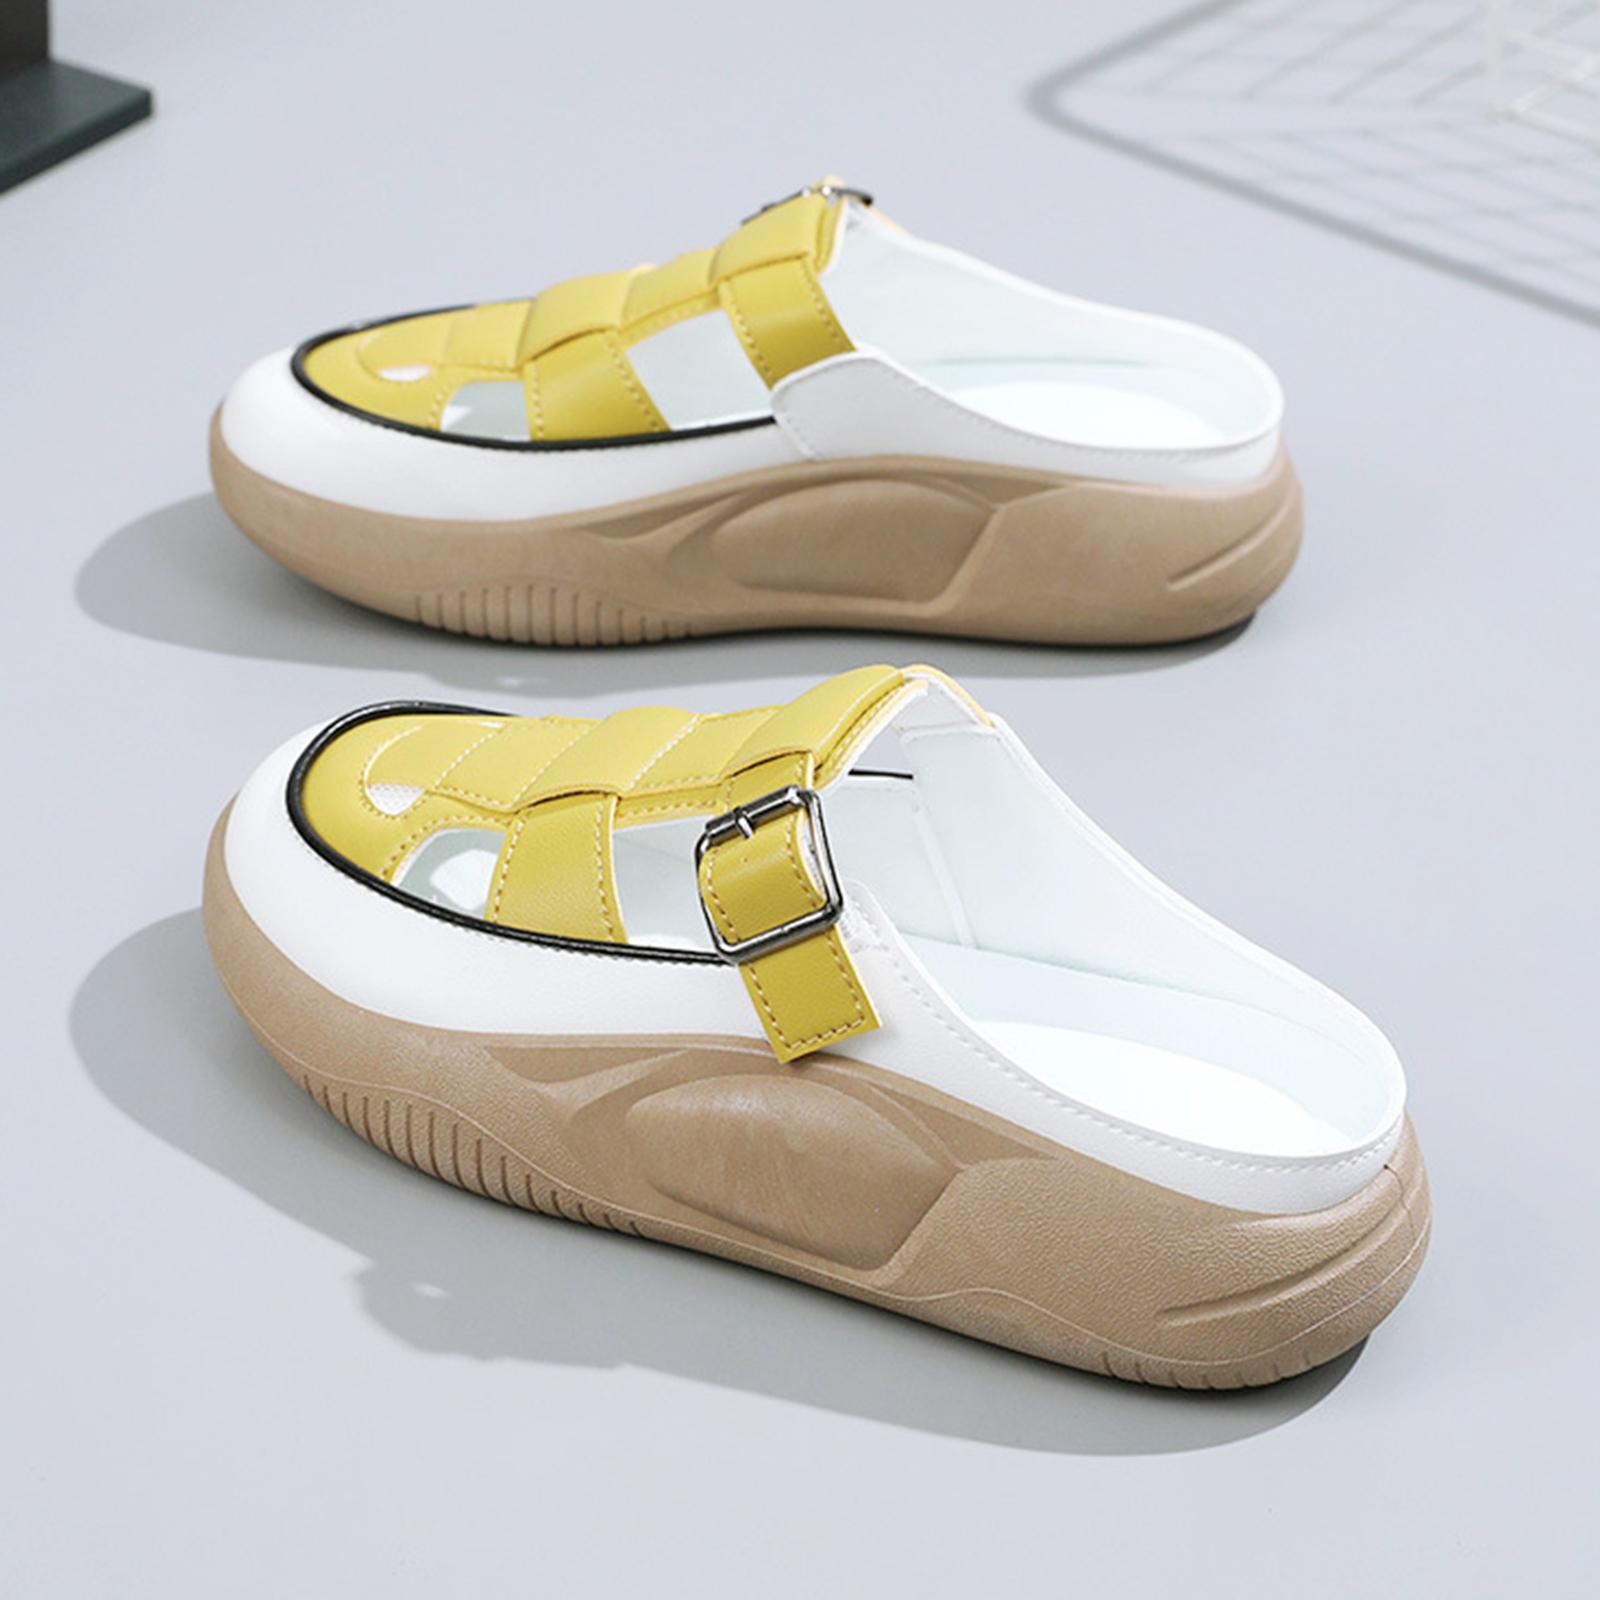 Women's Slide Sandals Comfortable Flat Shoes 5cm Thick Sole Nonslip Slippers Yellow 38